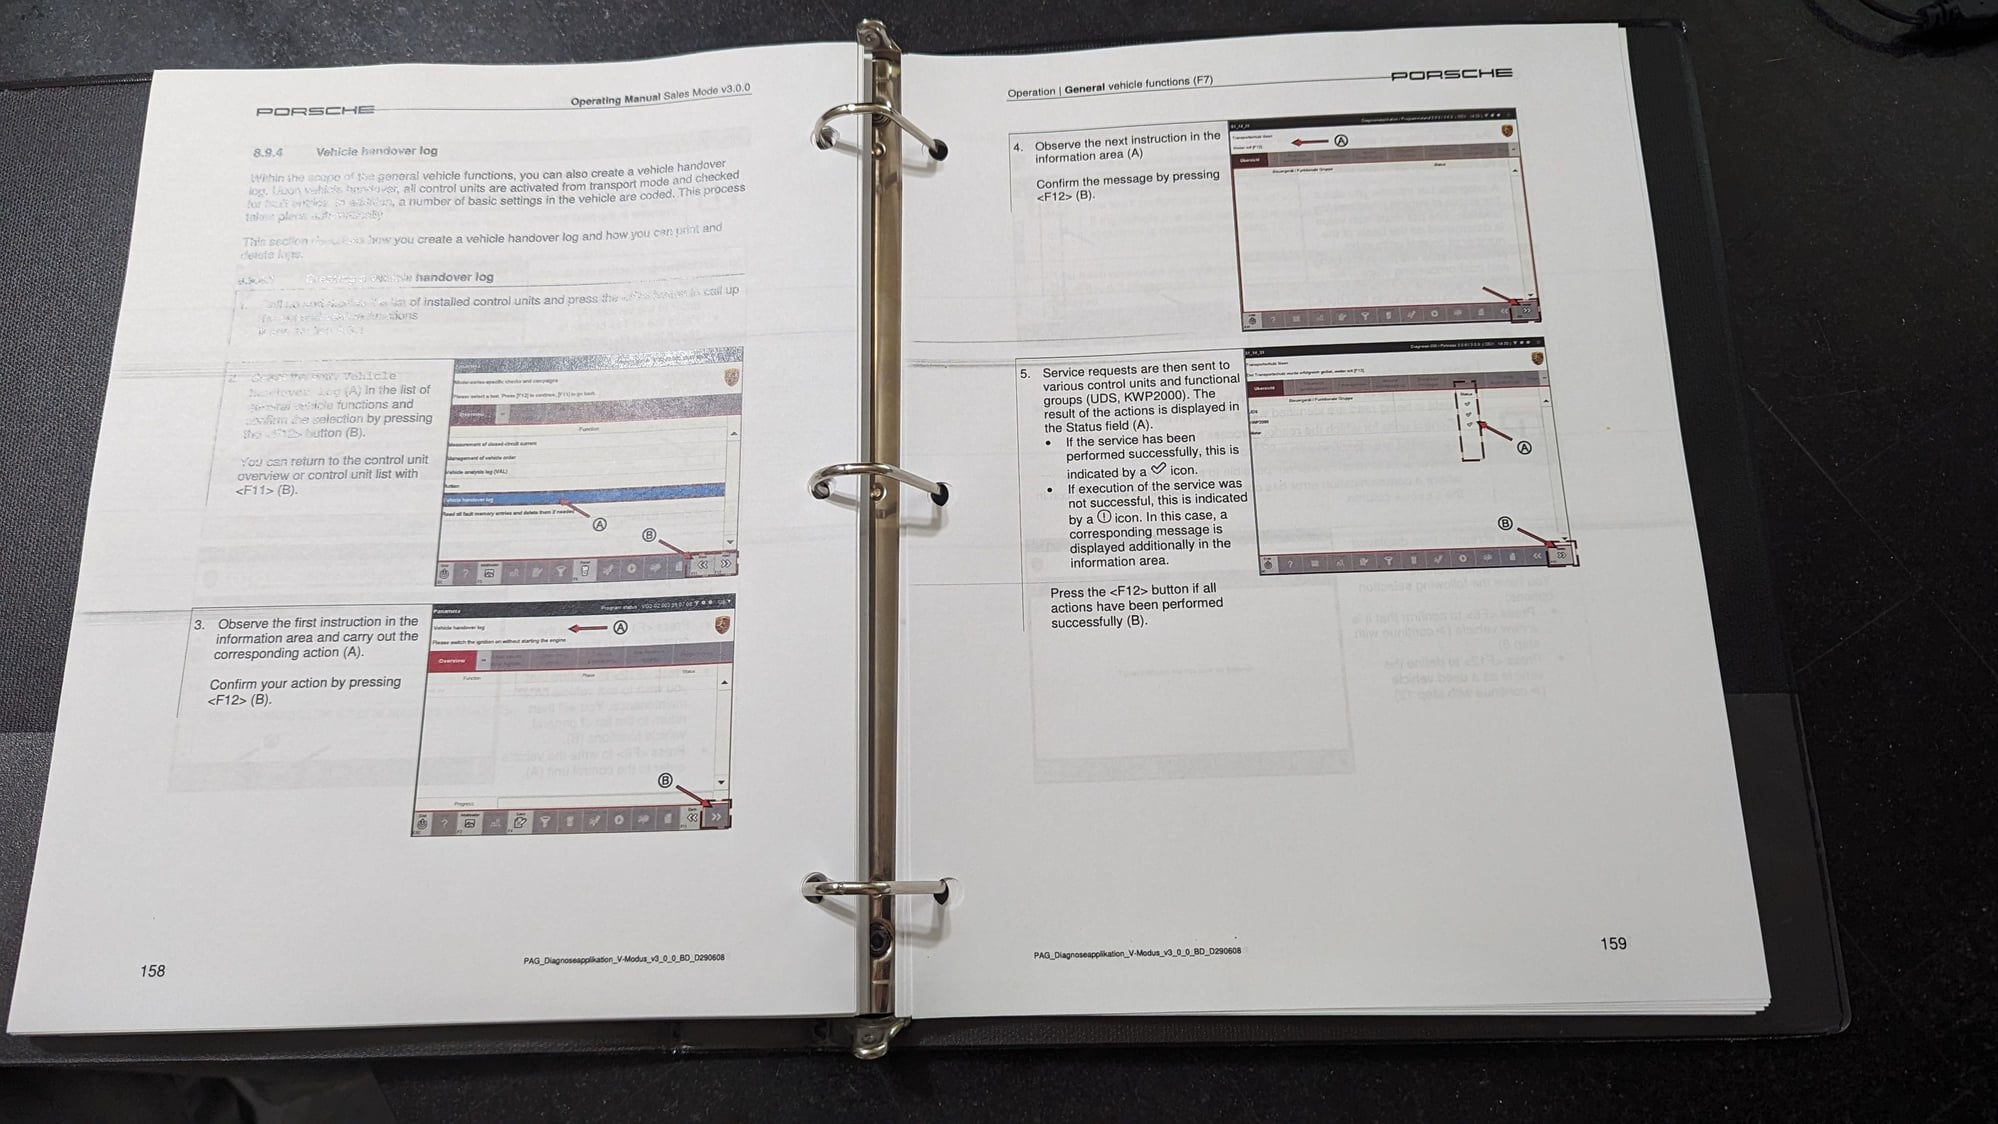 Audio Video/Electronics - Panisonic PIWIS 2 Notebook and 224 page printed operating manual. - Used - 1996 to 2018 Porsche All Models - Near Detroit, MI 48236, United States